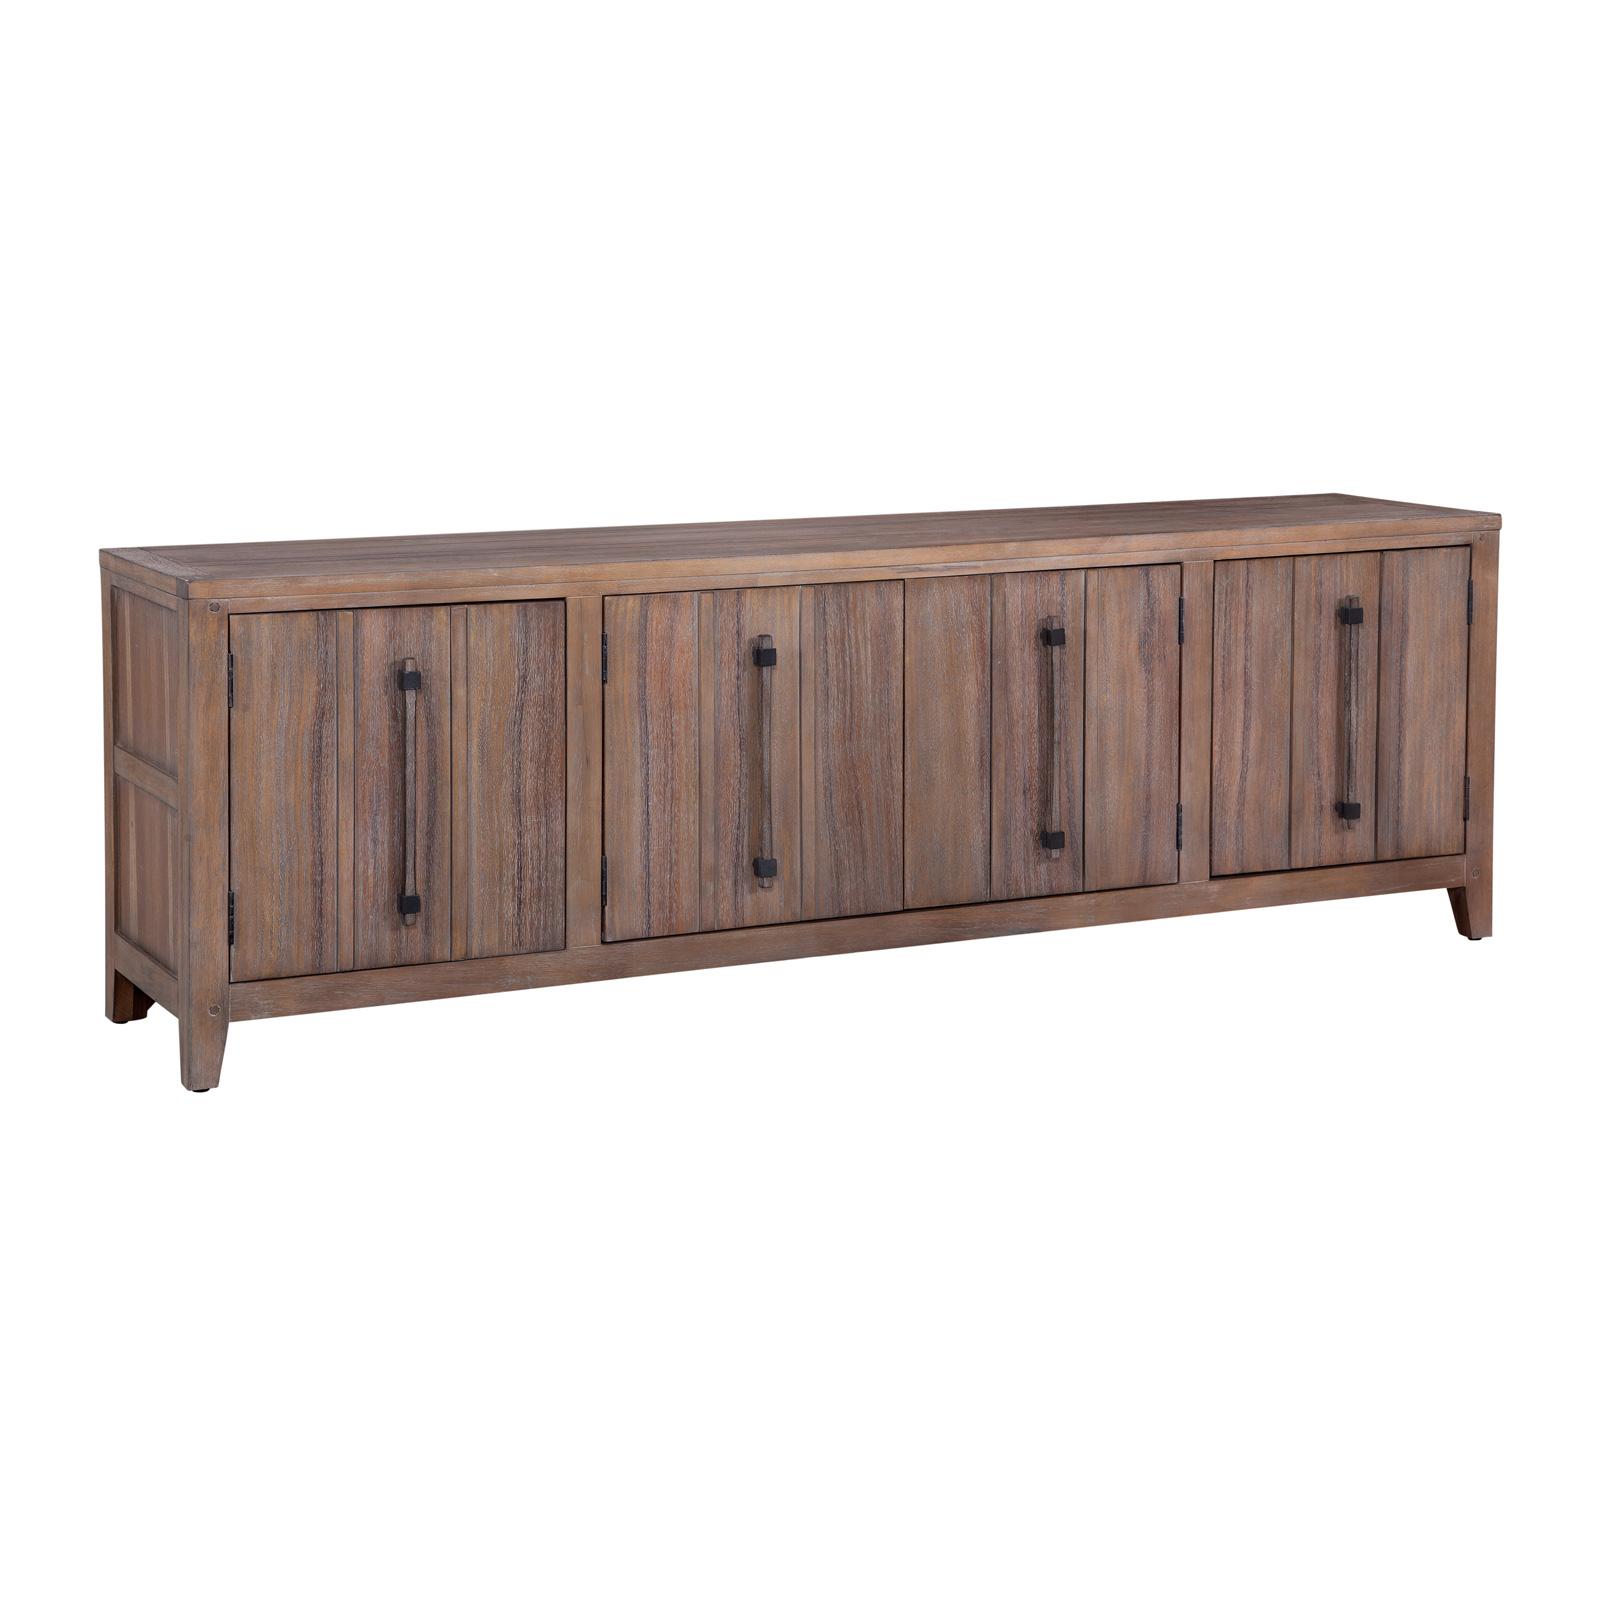 American Woodcrafters AURORA 2800-240 Tv Console